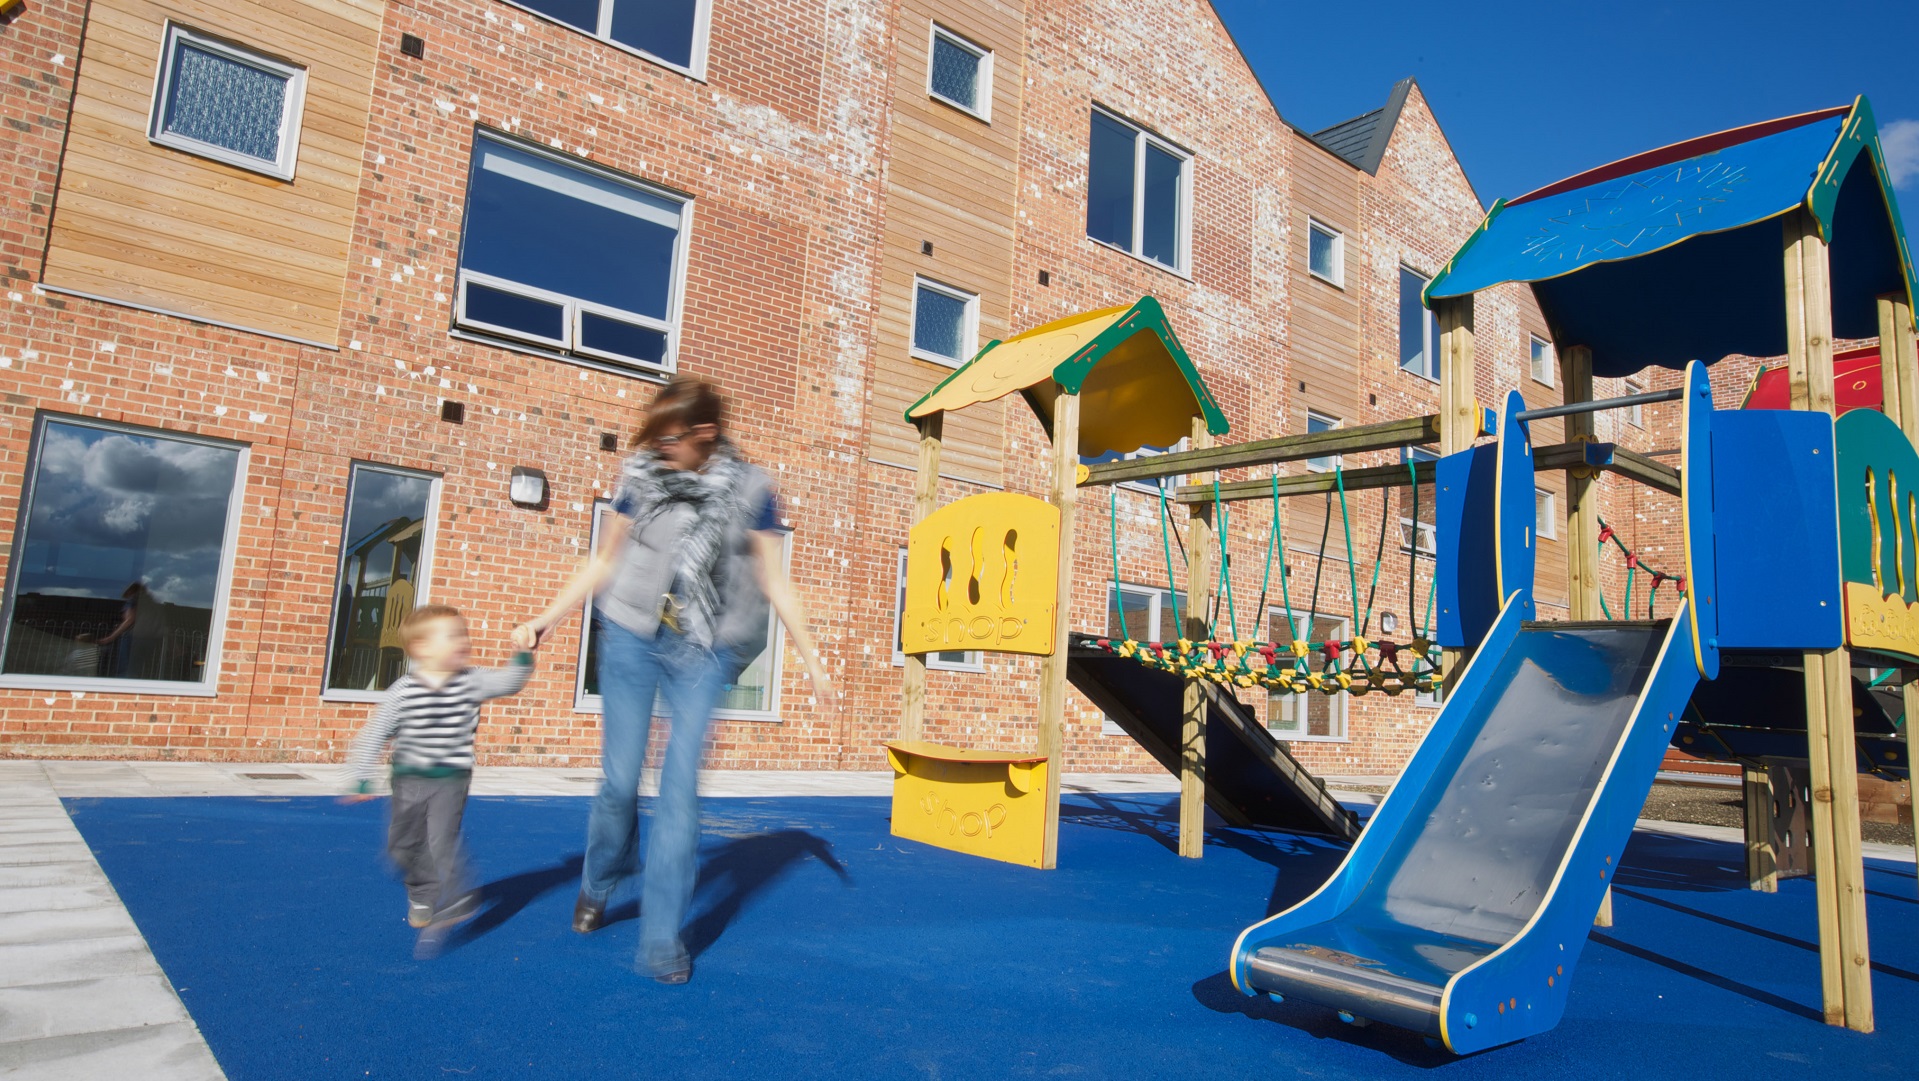 A resident and child enjoying the playground outside Cherry Tree View in Newcastle